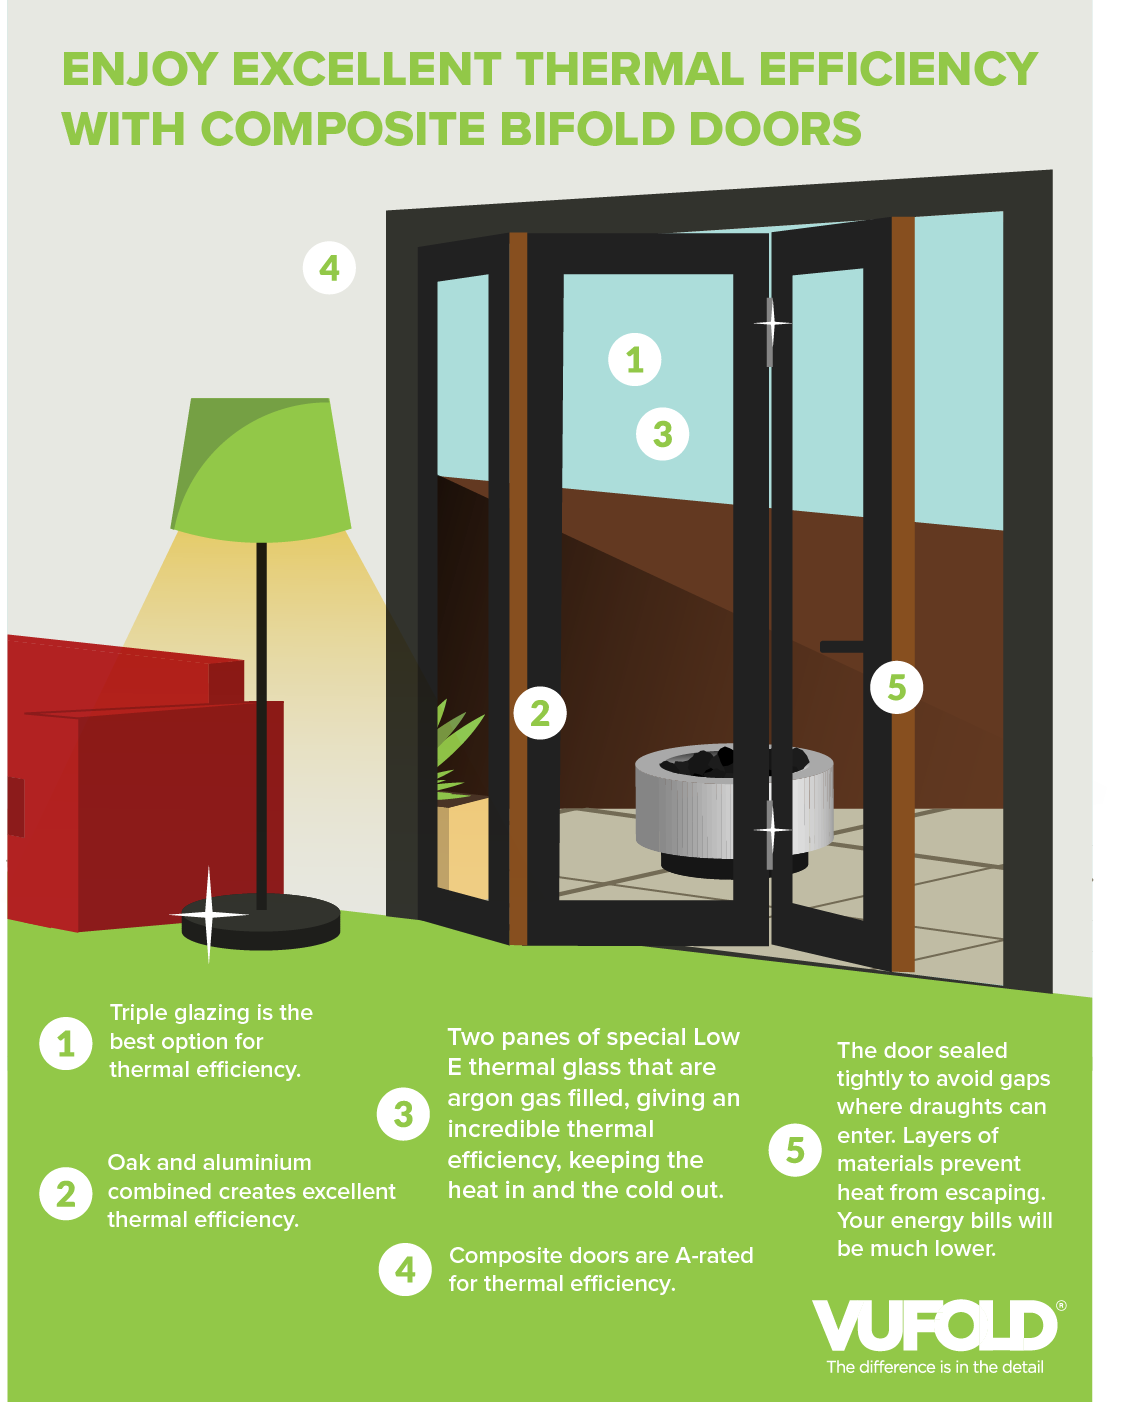 An infographic showing what makes Vufold doors a secure option